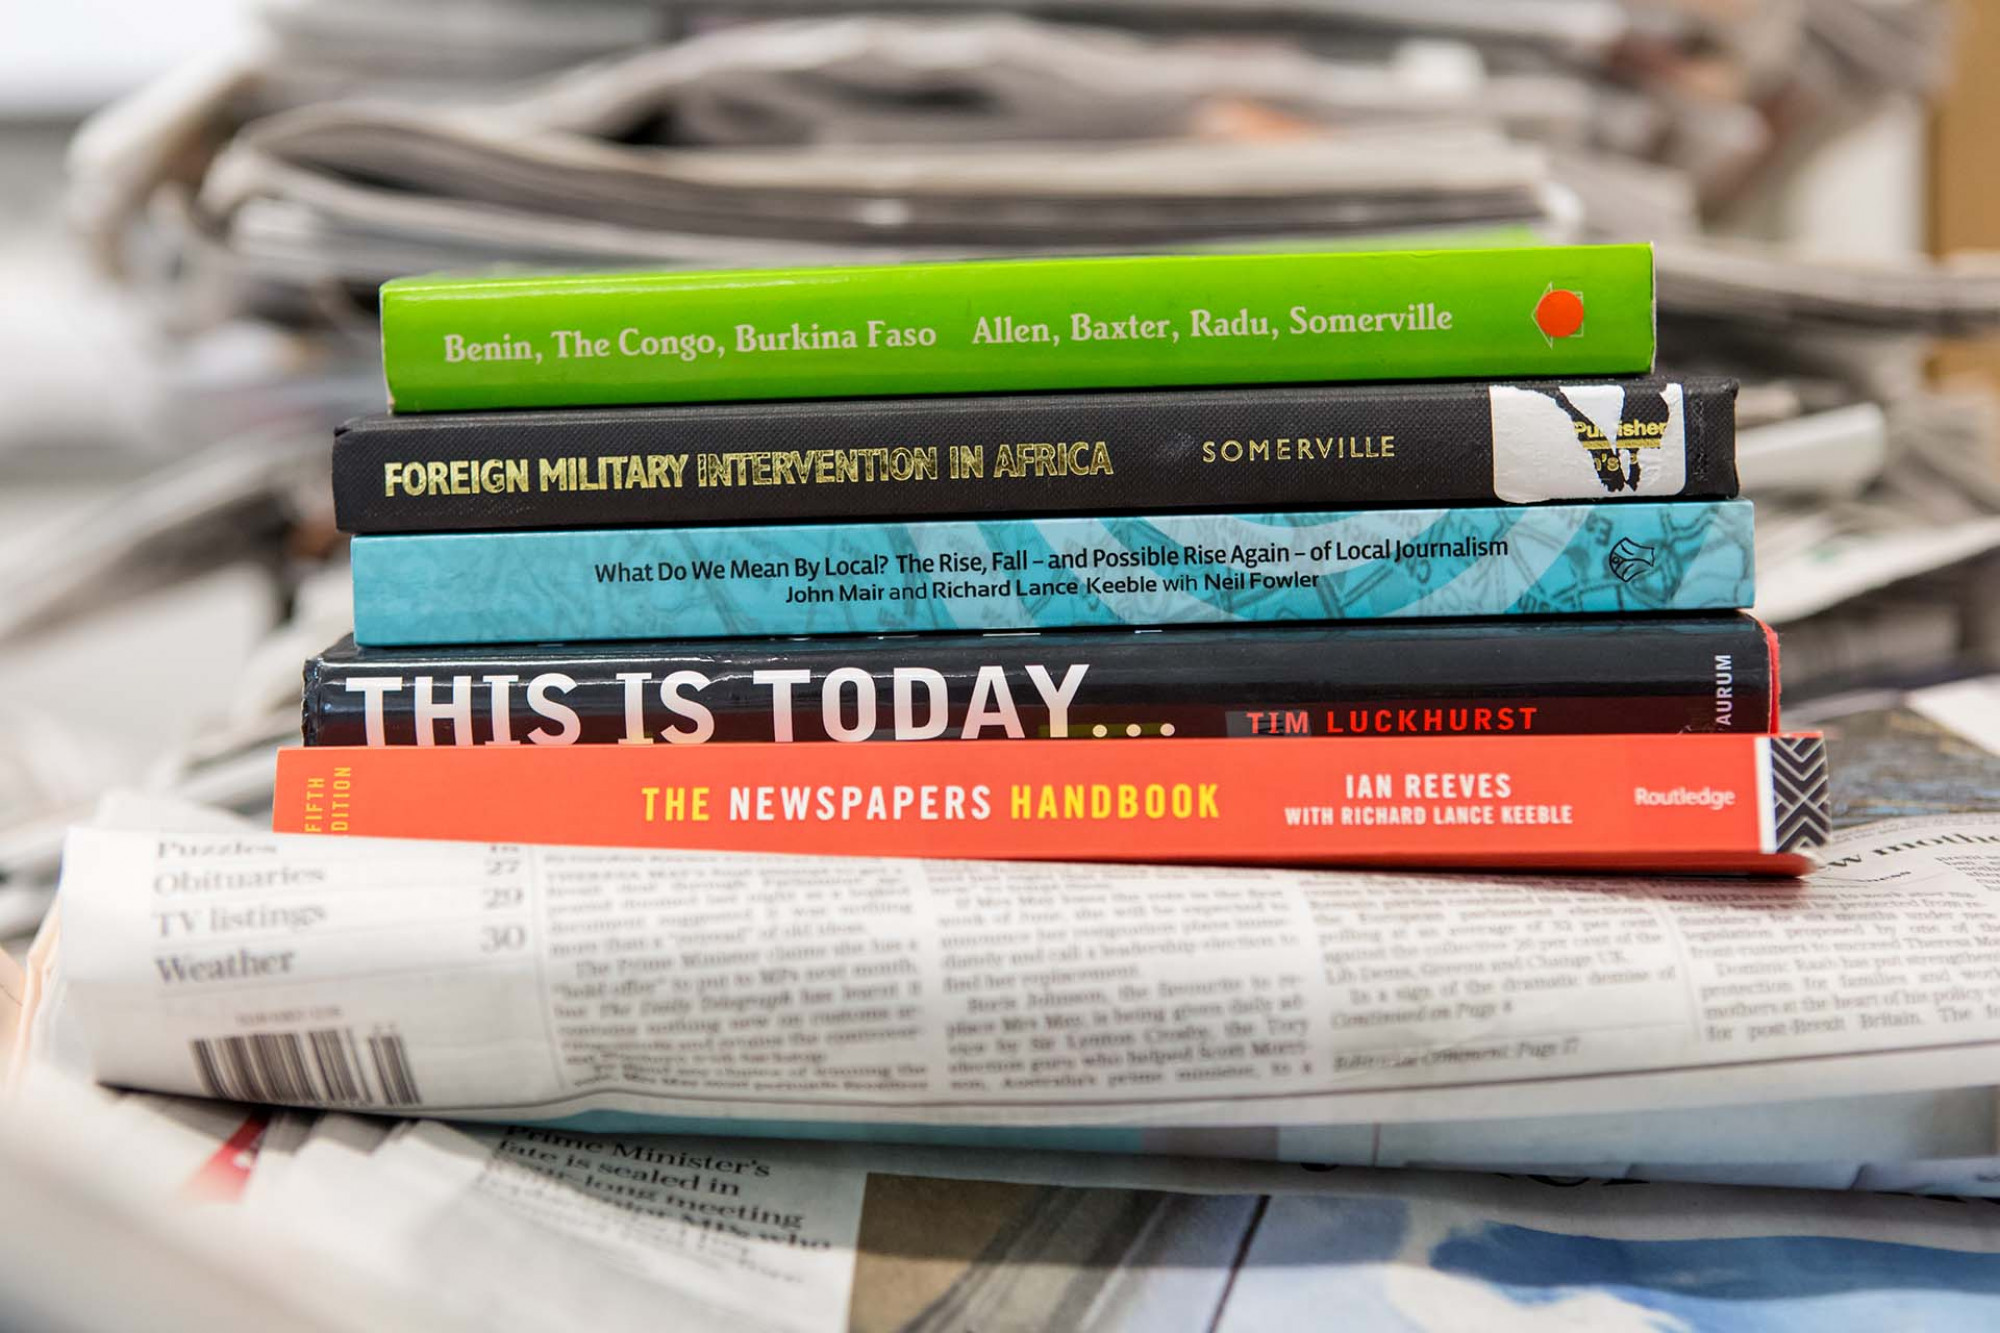 Stack of books about journalism written by Centre for Journalism staff members